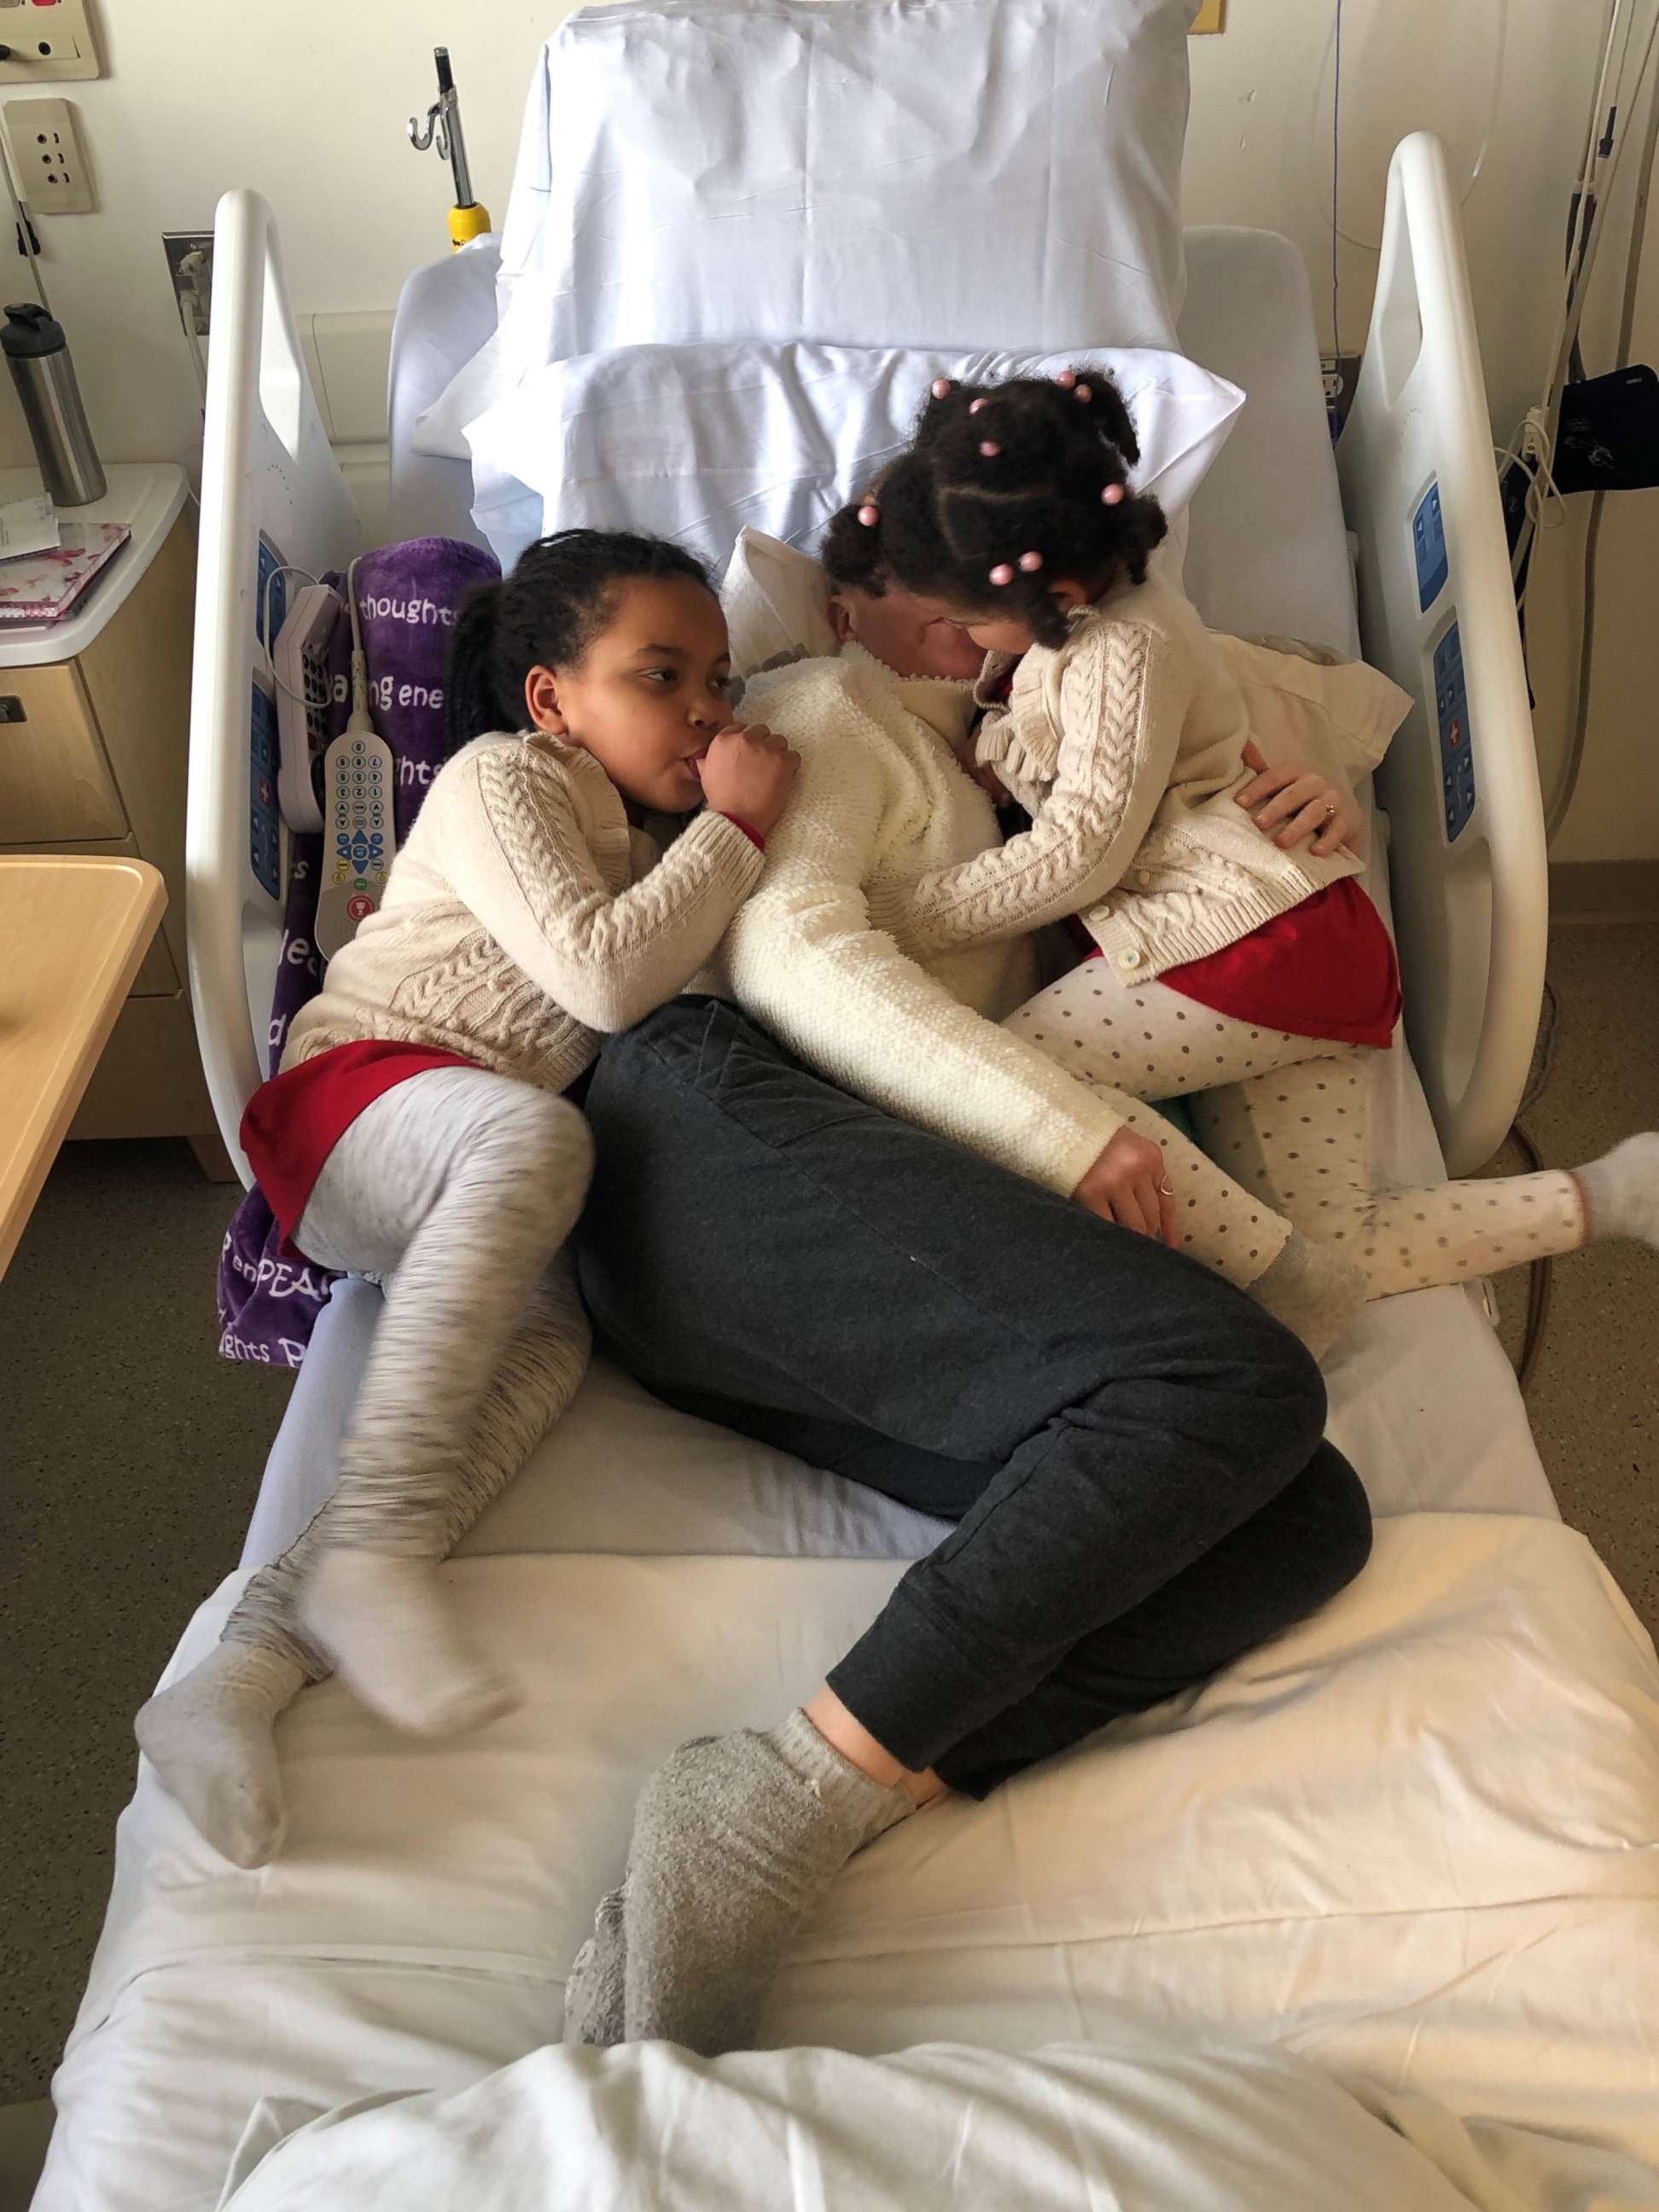 PHOTO: Charlotte Ngarukiye, of New Hampshire, is comforted by her two daughters while undergoing treatment for colorectal cancer.